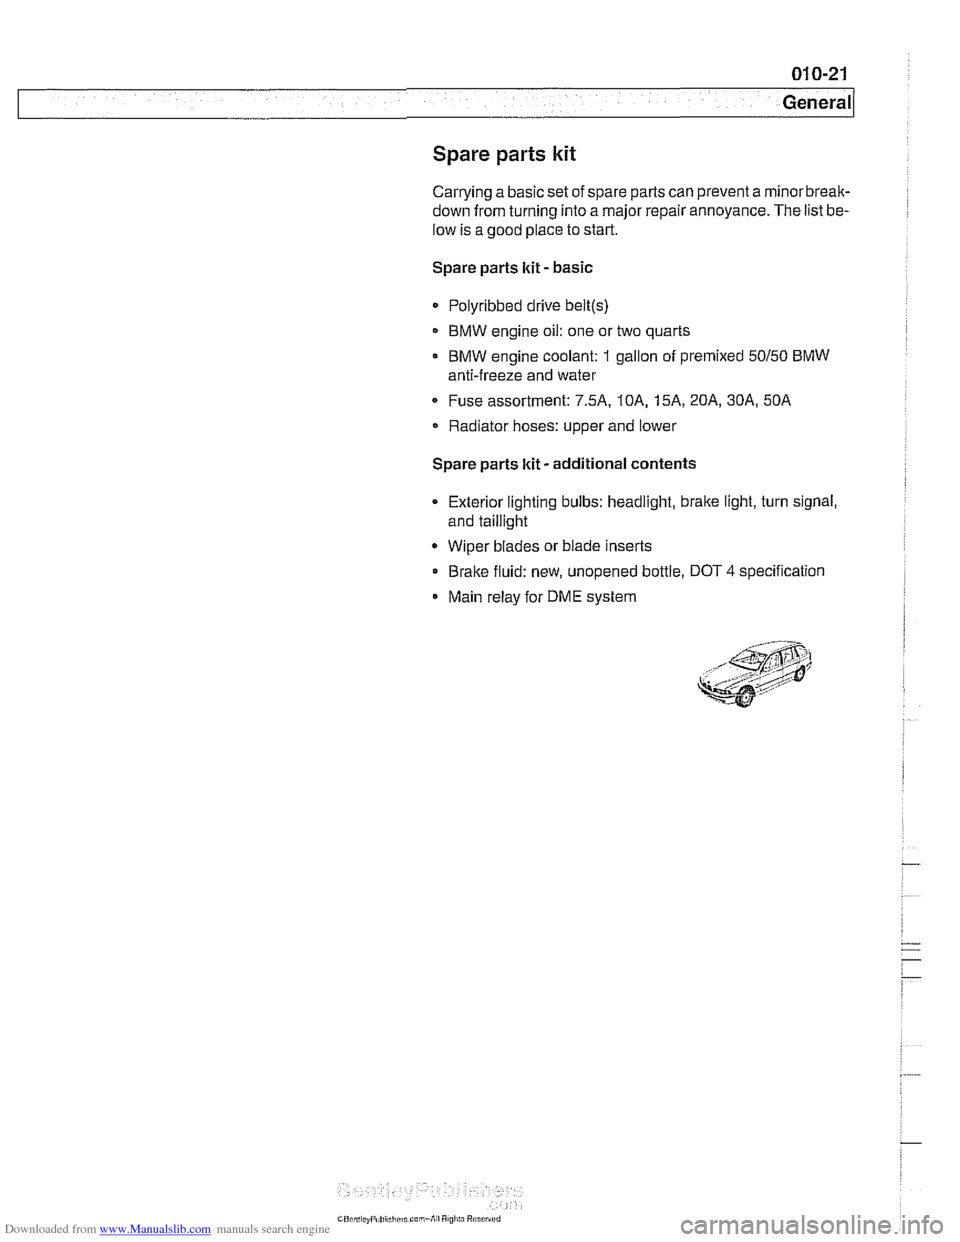 BMW 528i 1998 E39 Workshop Manual Downloaded from www.Manualslib.com manuals search engine 
Spare parts kit 
Carrying a basic set of spare parts can prevent  a rninorbreak- 
down from turning  into a major  repair annoyance.  The list